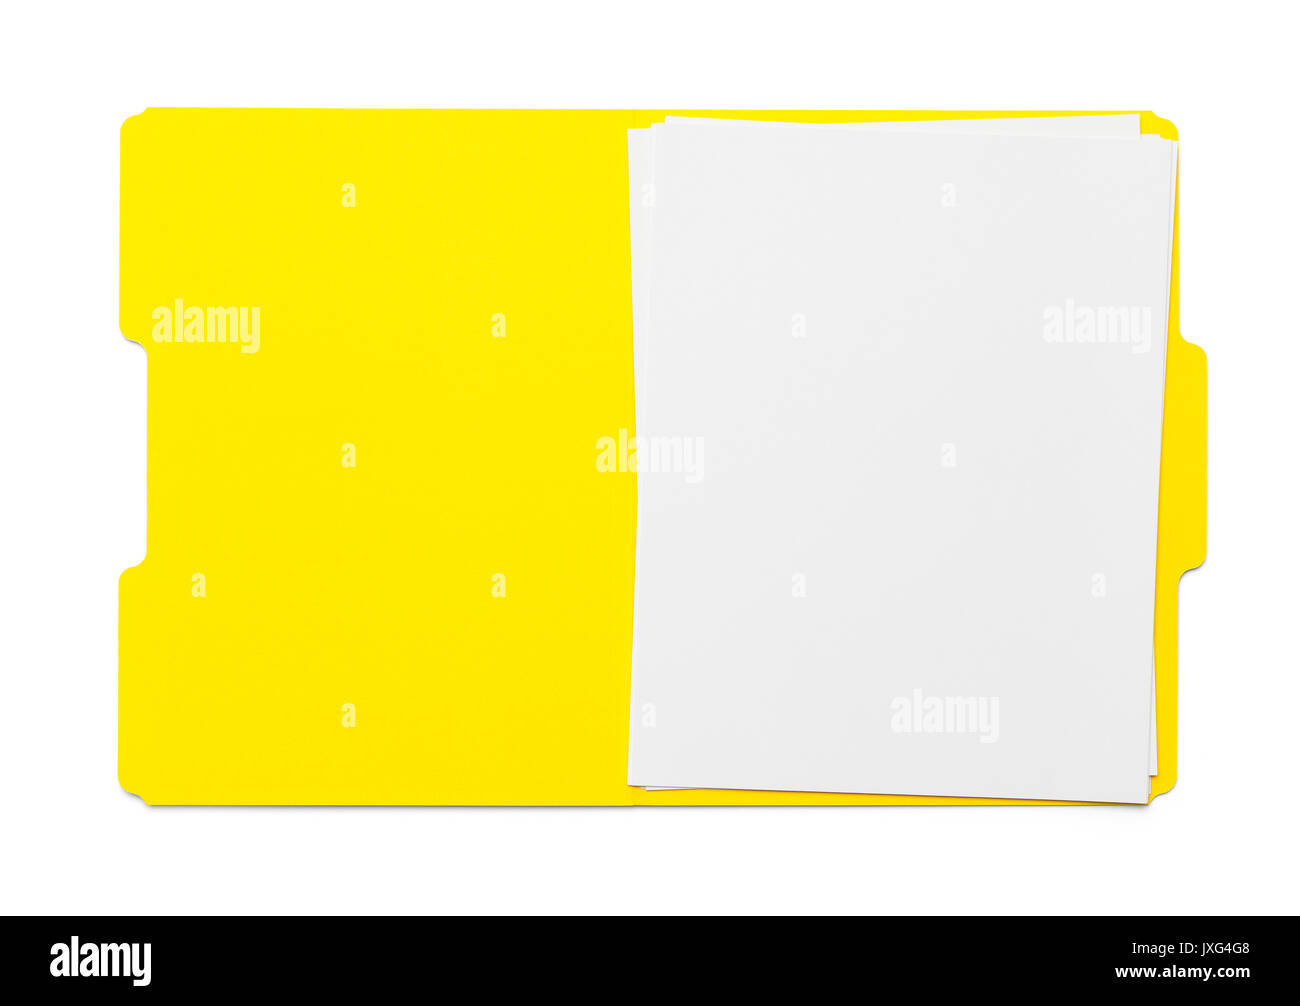 Yellow Open Folder With Paper Isolated on White Background. Stock Photo